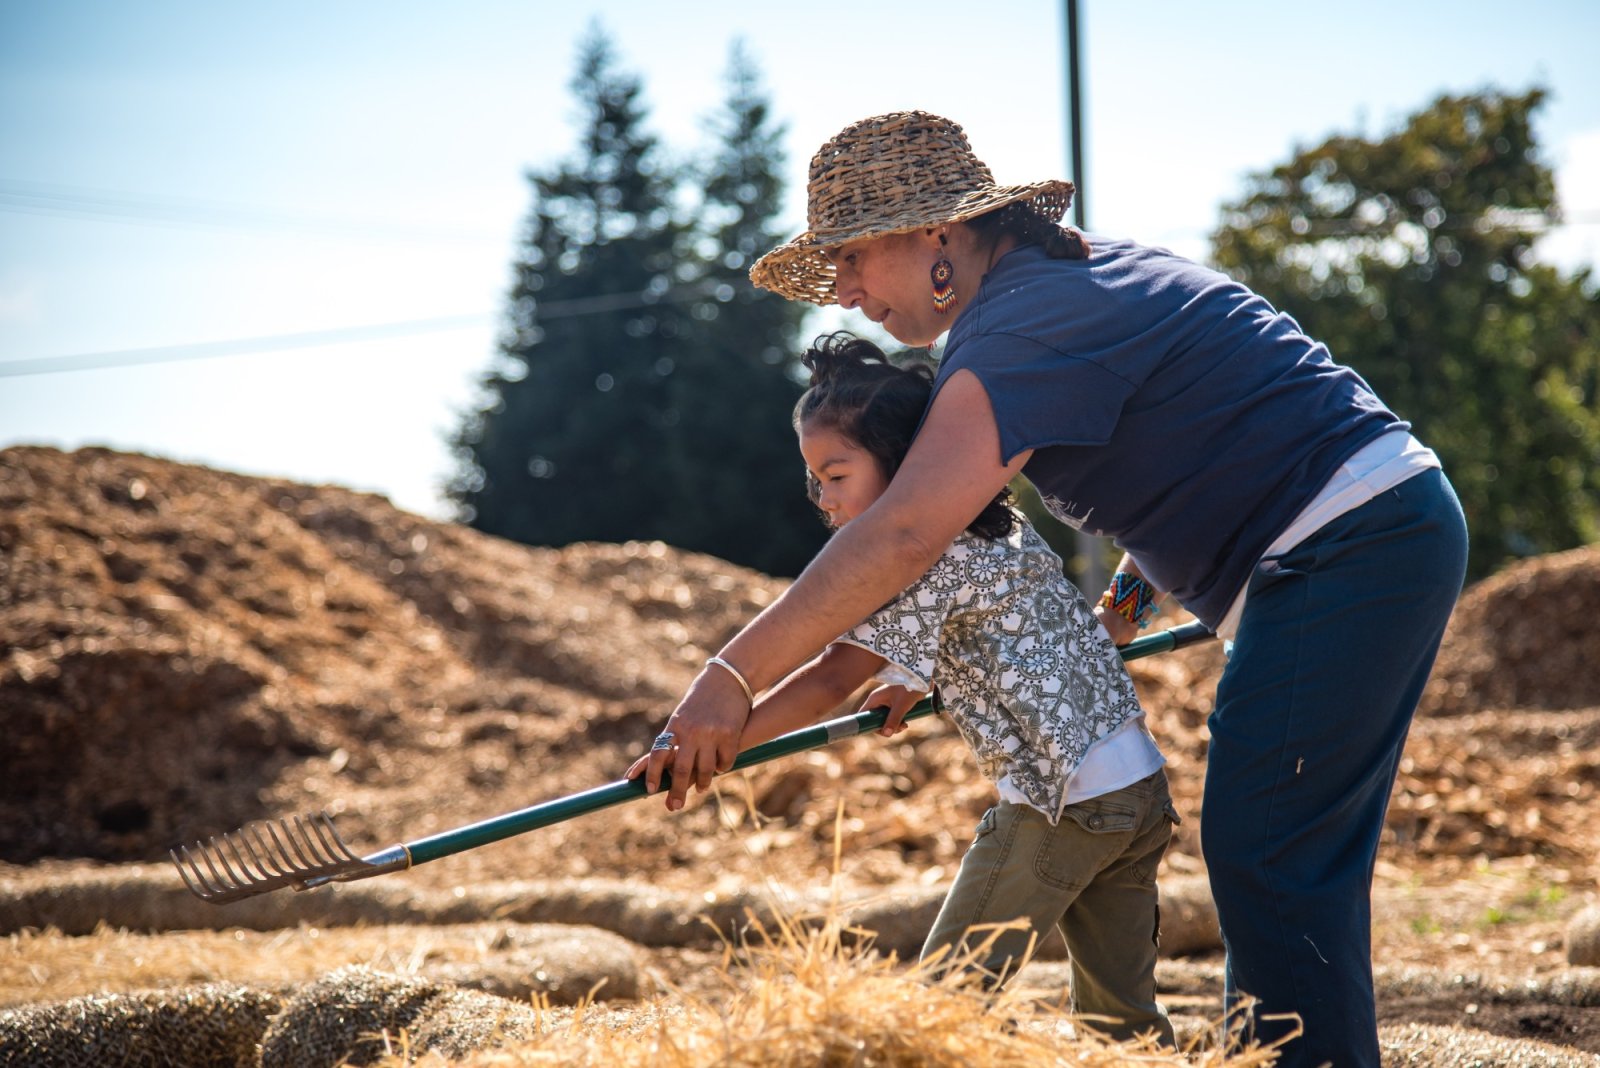 A woman wearing a sun hat and a blue shirt stands in a field with her daughter. She is showing her young daughter a farming technique by helping her hold a long piece farming equipment